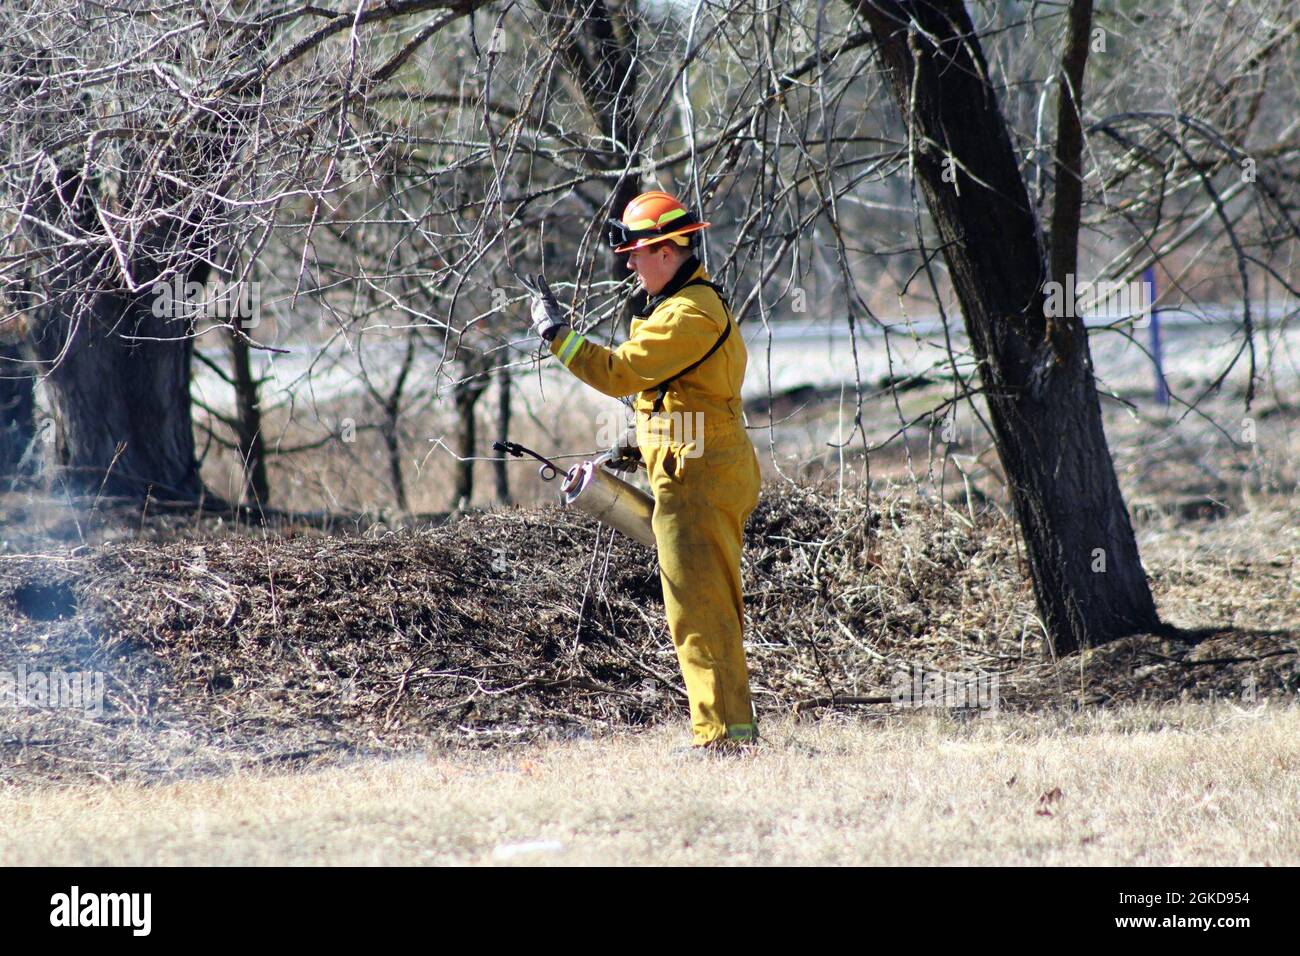 Forestry Technician Tim Parry lights a prescribed burn March 18, 2021, along the railroad tracks on South Post at Fort McCoy, Wis. The post prescribed burn team includes personnel with the Fort McCoy Directorate of Emergency Services Fire Department; Directorate of Public Works (DPW) Environmental Division Natural Resources Branch; Directorate of Plans, Training, Mobilization and Security; and the Colorado State University Center for Environmental Management of Military Lands, under contract with the post. Prescribed burns also improve wildlife habitat, control invasive plant species, restore Stock Photo